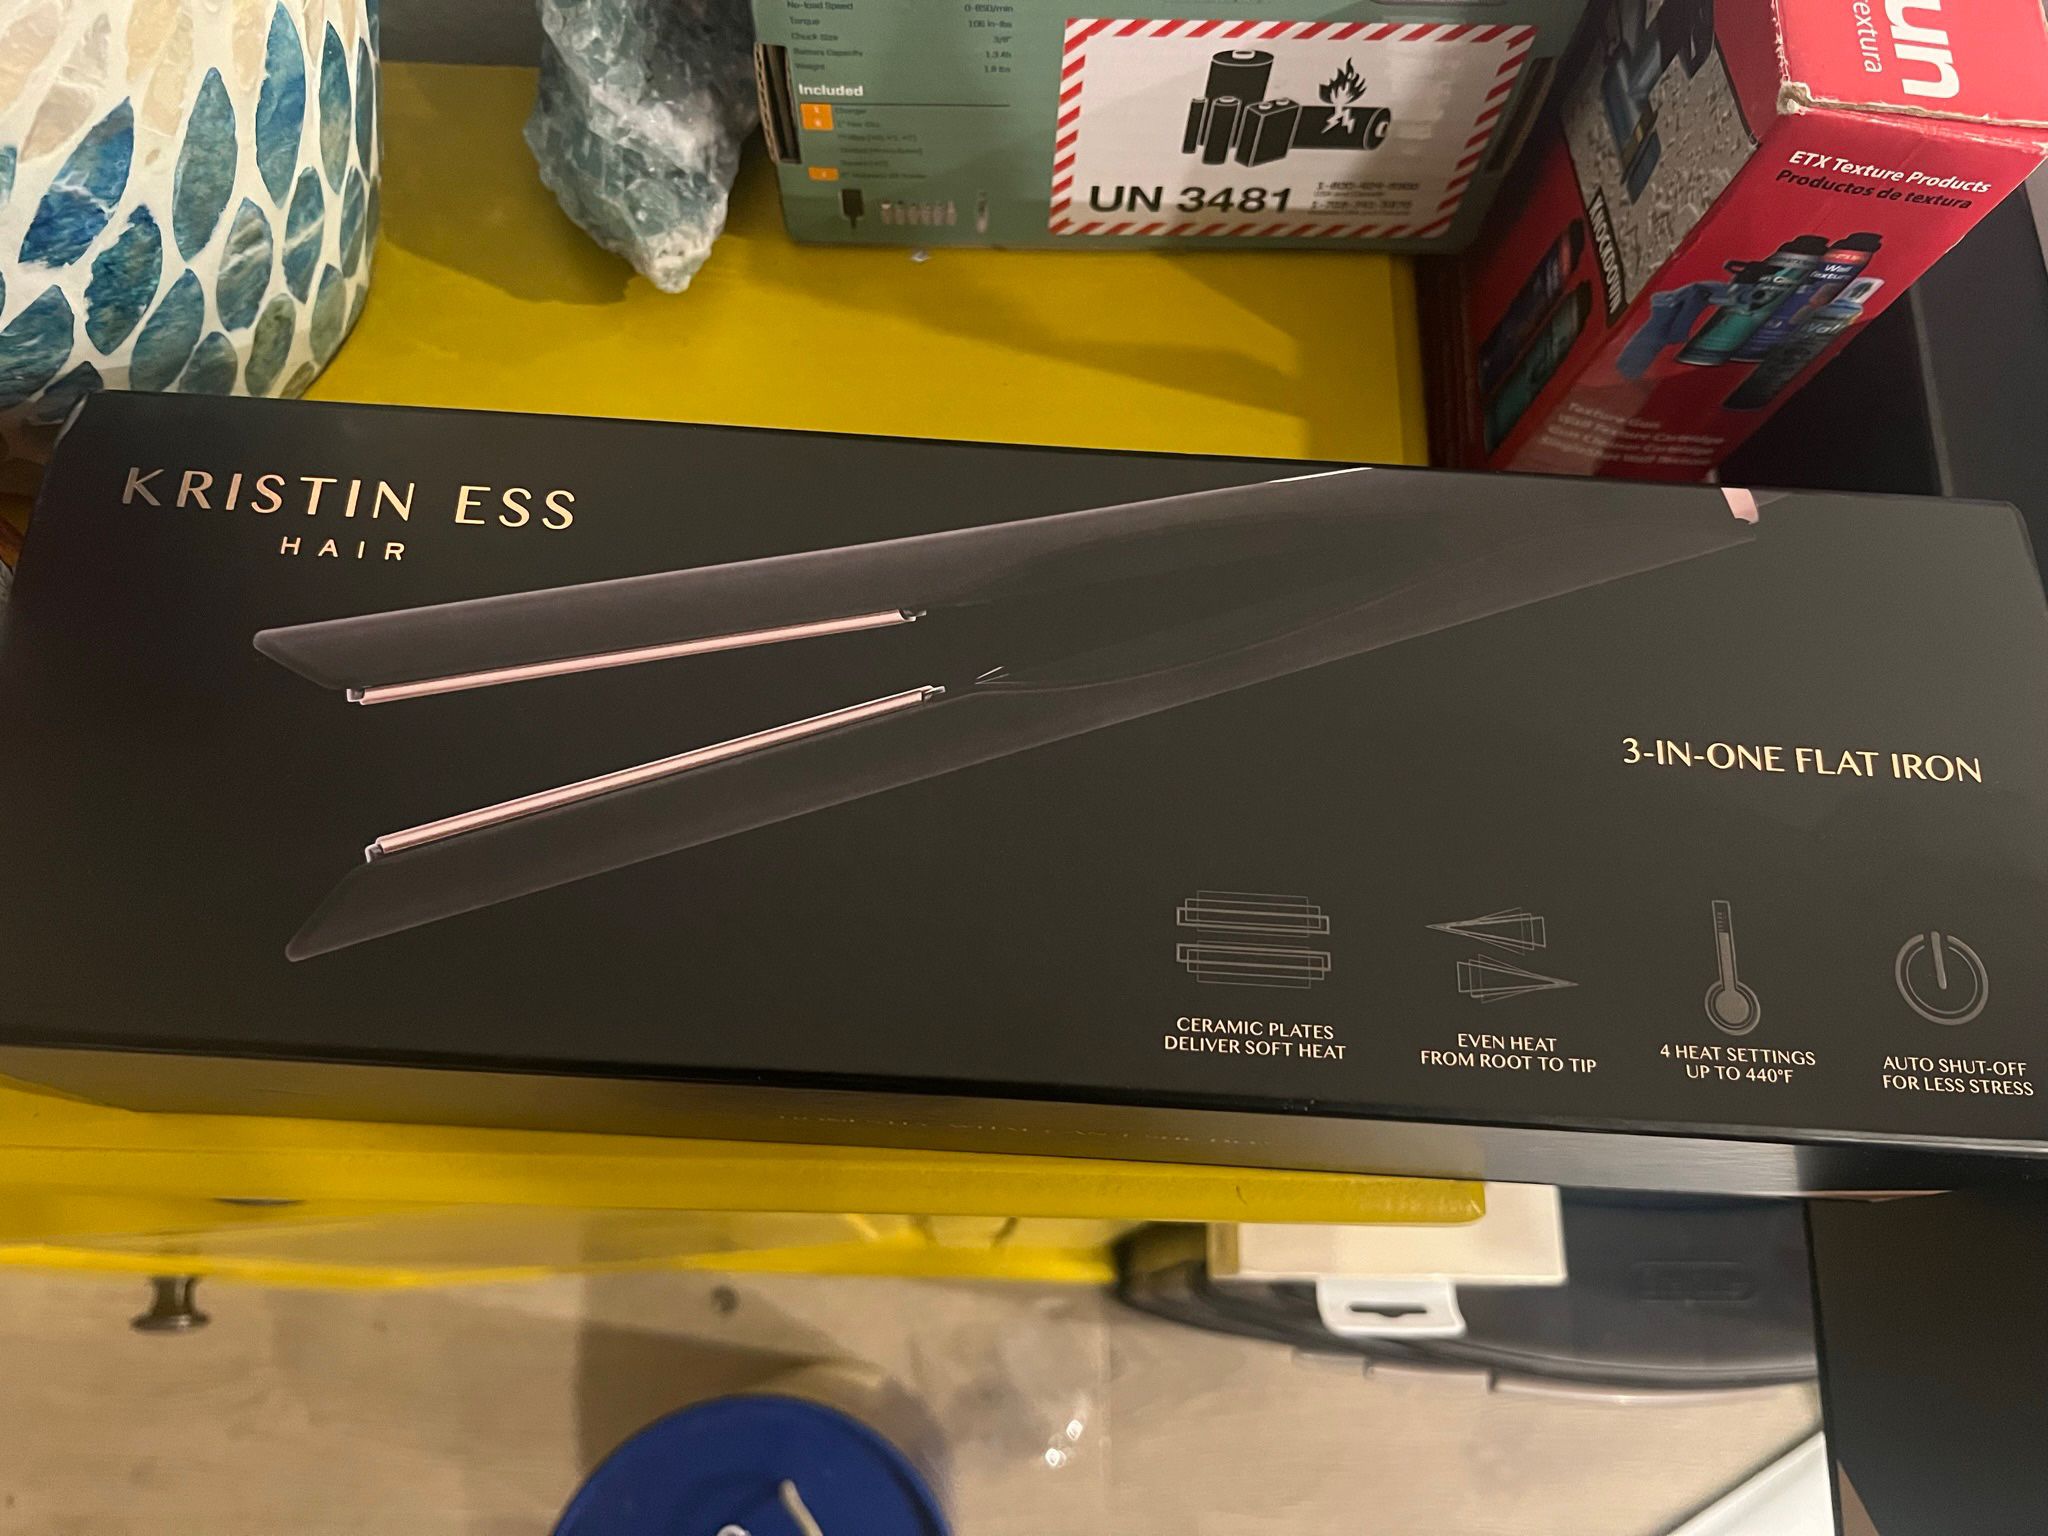 NEW IN BOX Kristin Ess Hair 3-In-One Ceramic Flat Iron for Straightening, Waving + Curling, Soft Heat Technology for Smoothing + Frizz Control